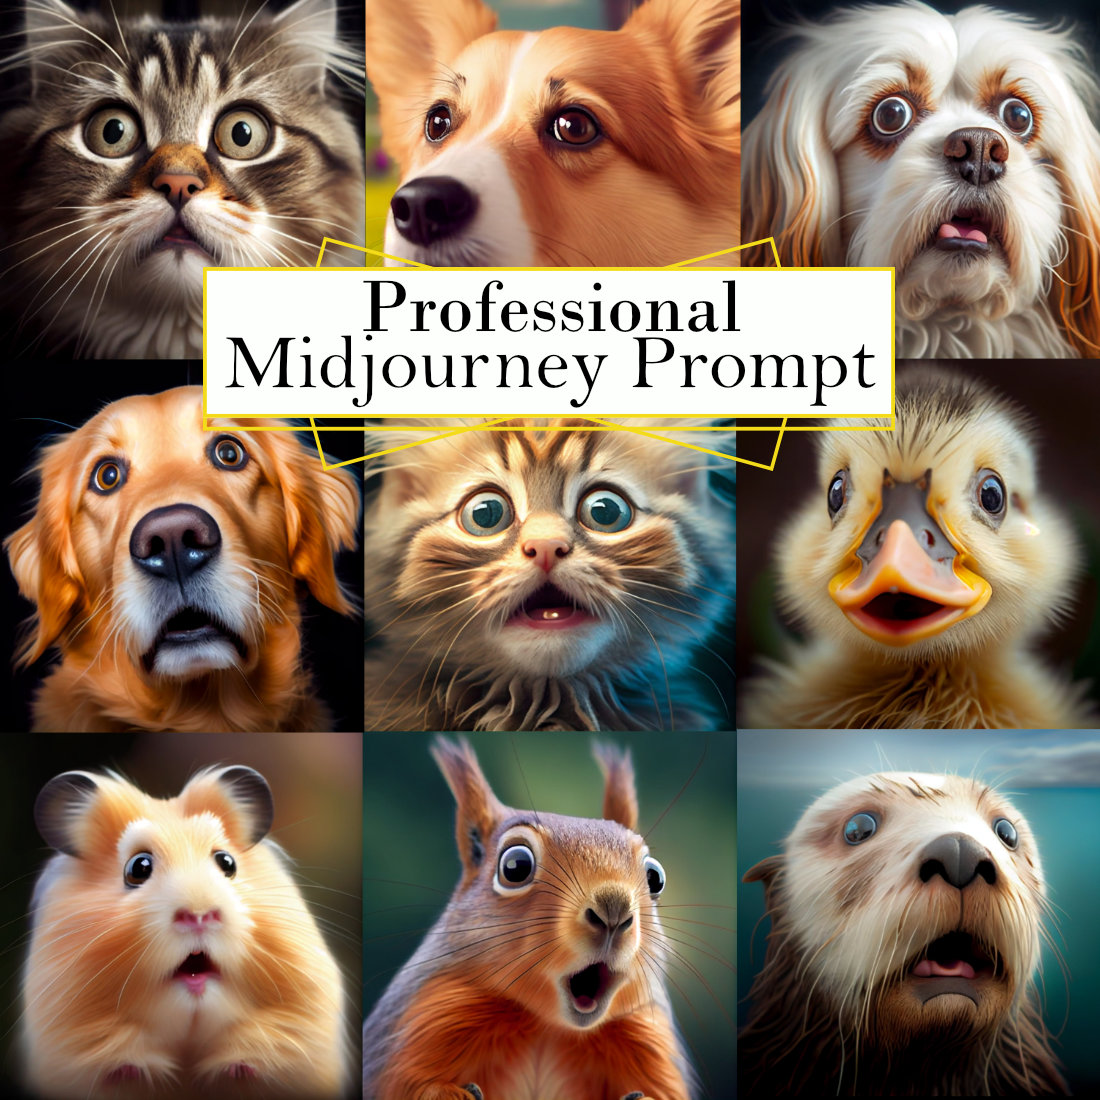 Animal Meme Faces Midjourney Prompt cover image.